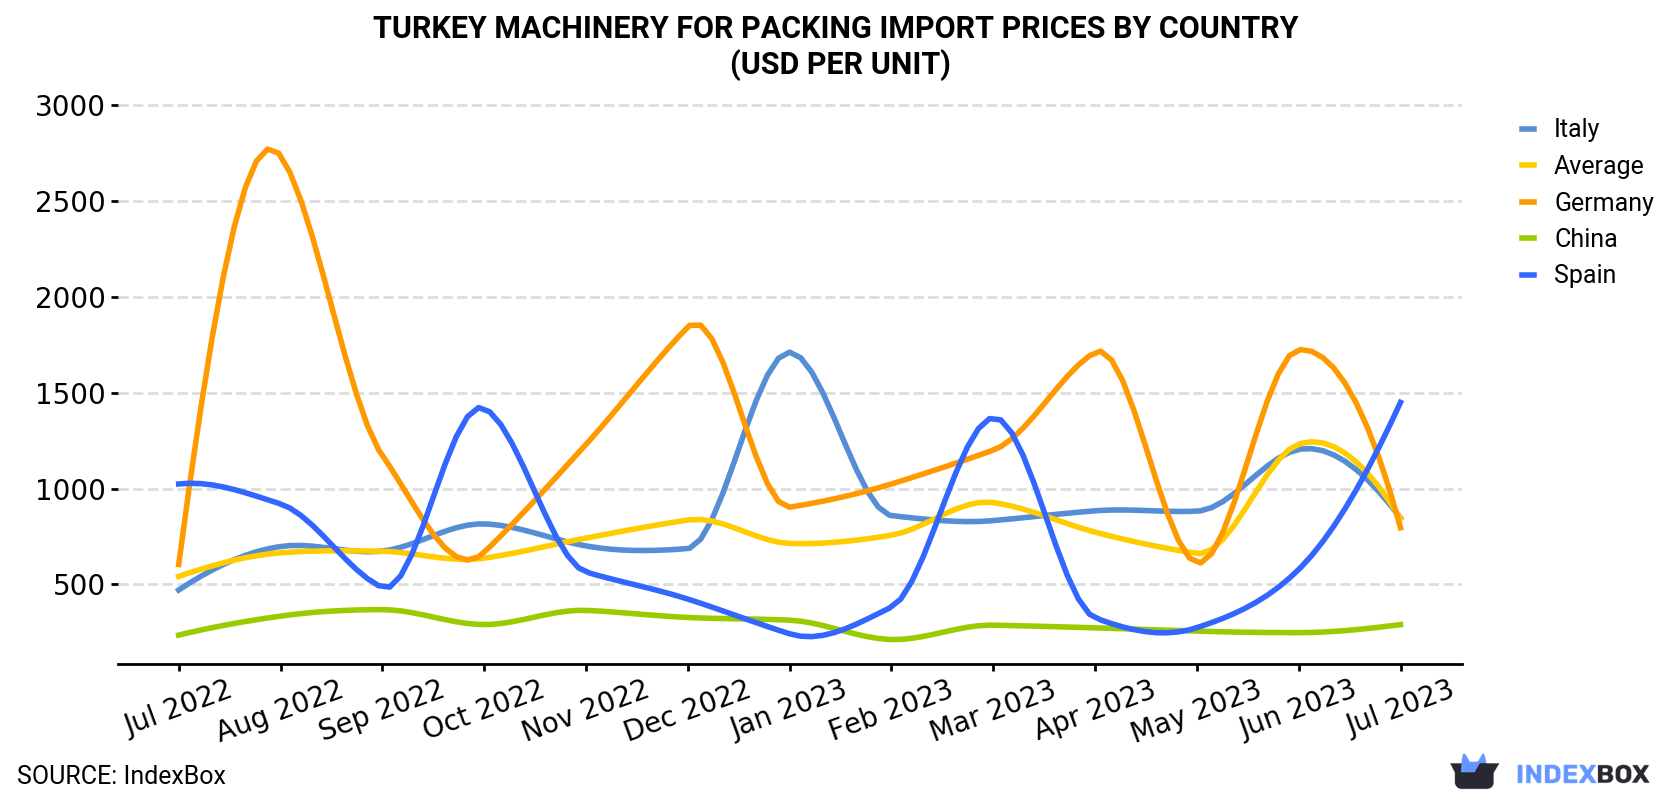 Turkey Machinery For Packing Import Prices By Country (USD Per Unit)